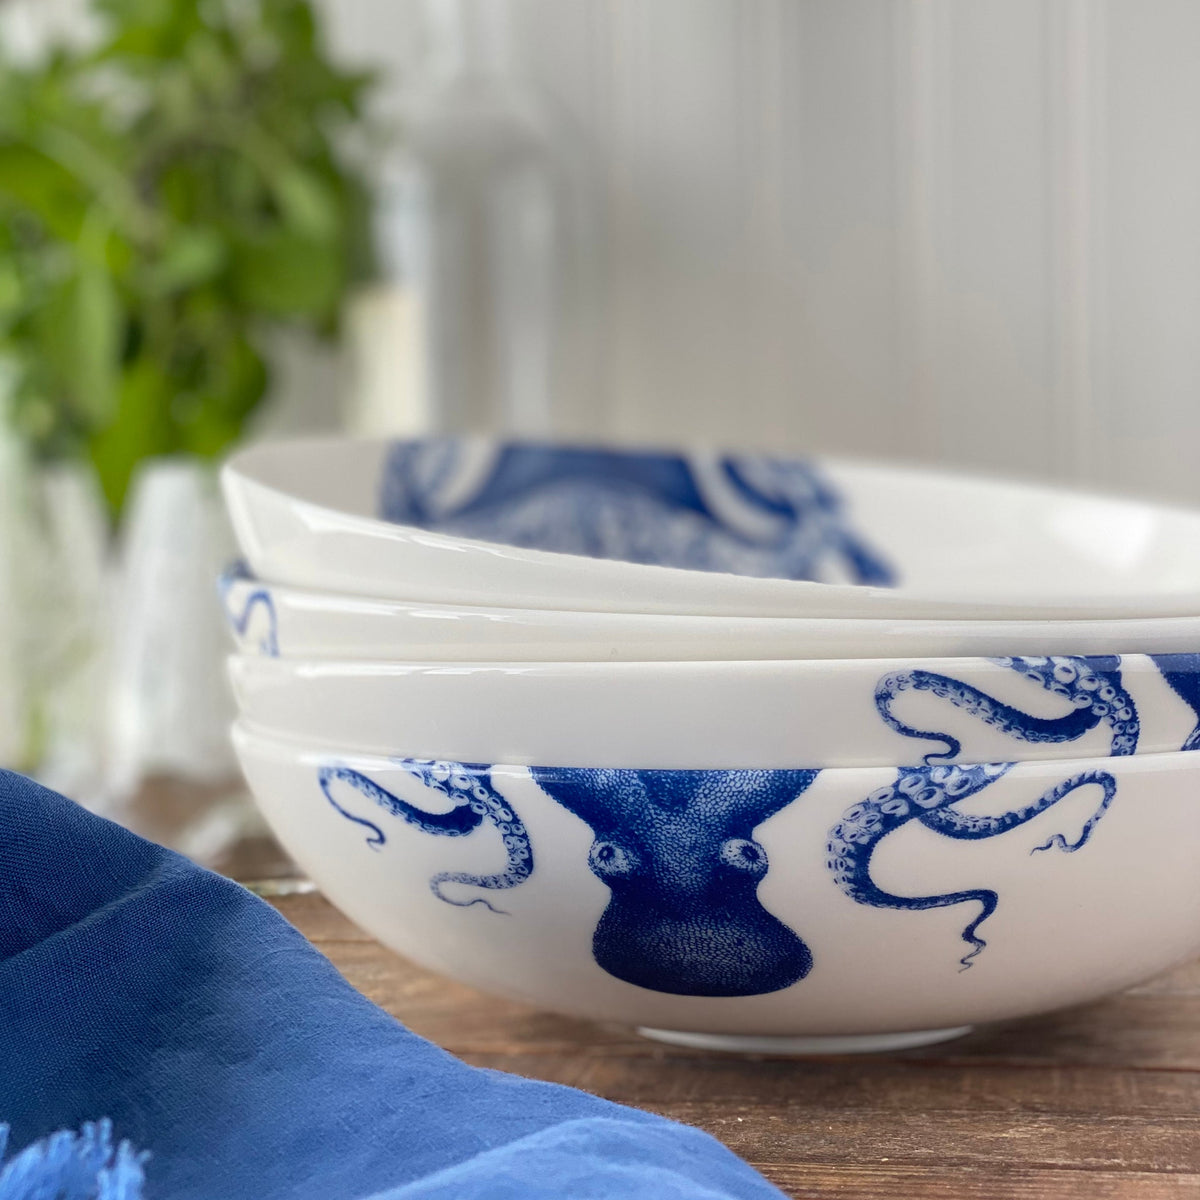 Three Lucy Coupe Soup Bowls Blue by Caskata Artisanal Home in a deepwater whimsy inspired blue and white color combination, displayed on a wooden table.